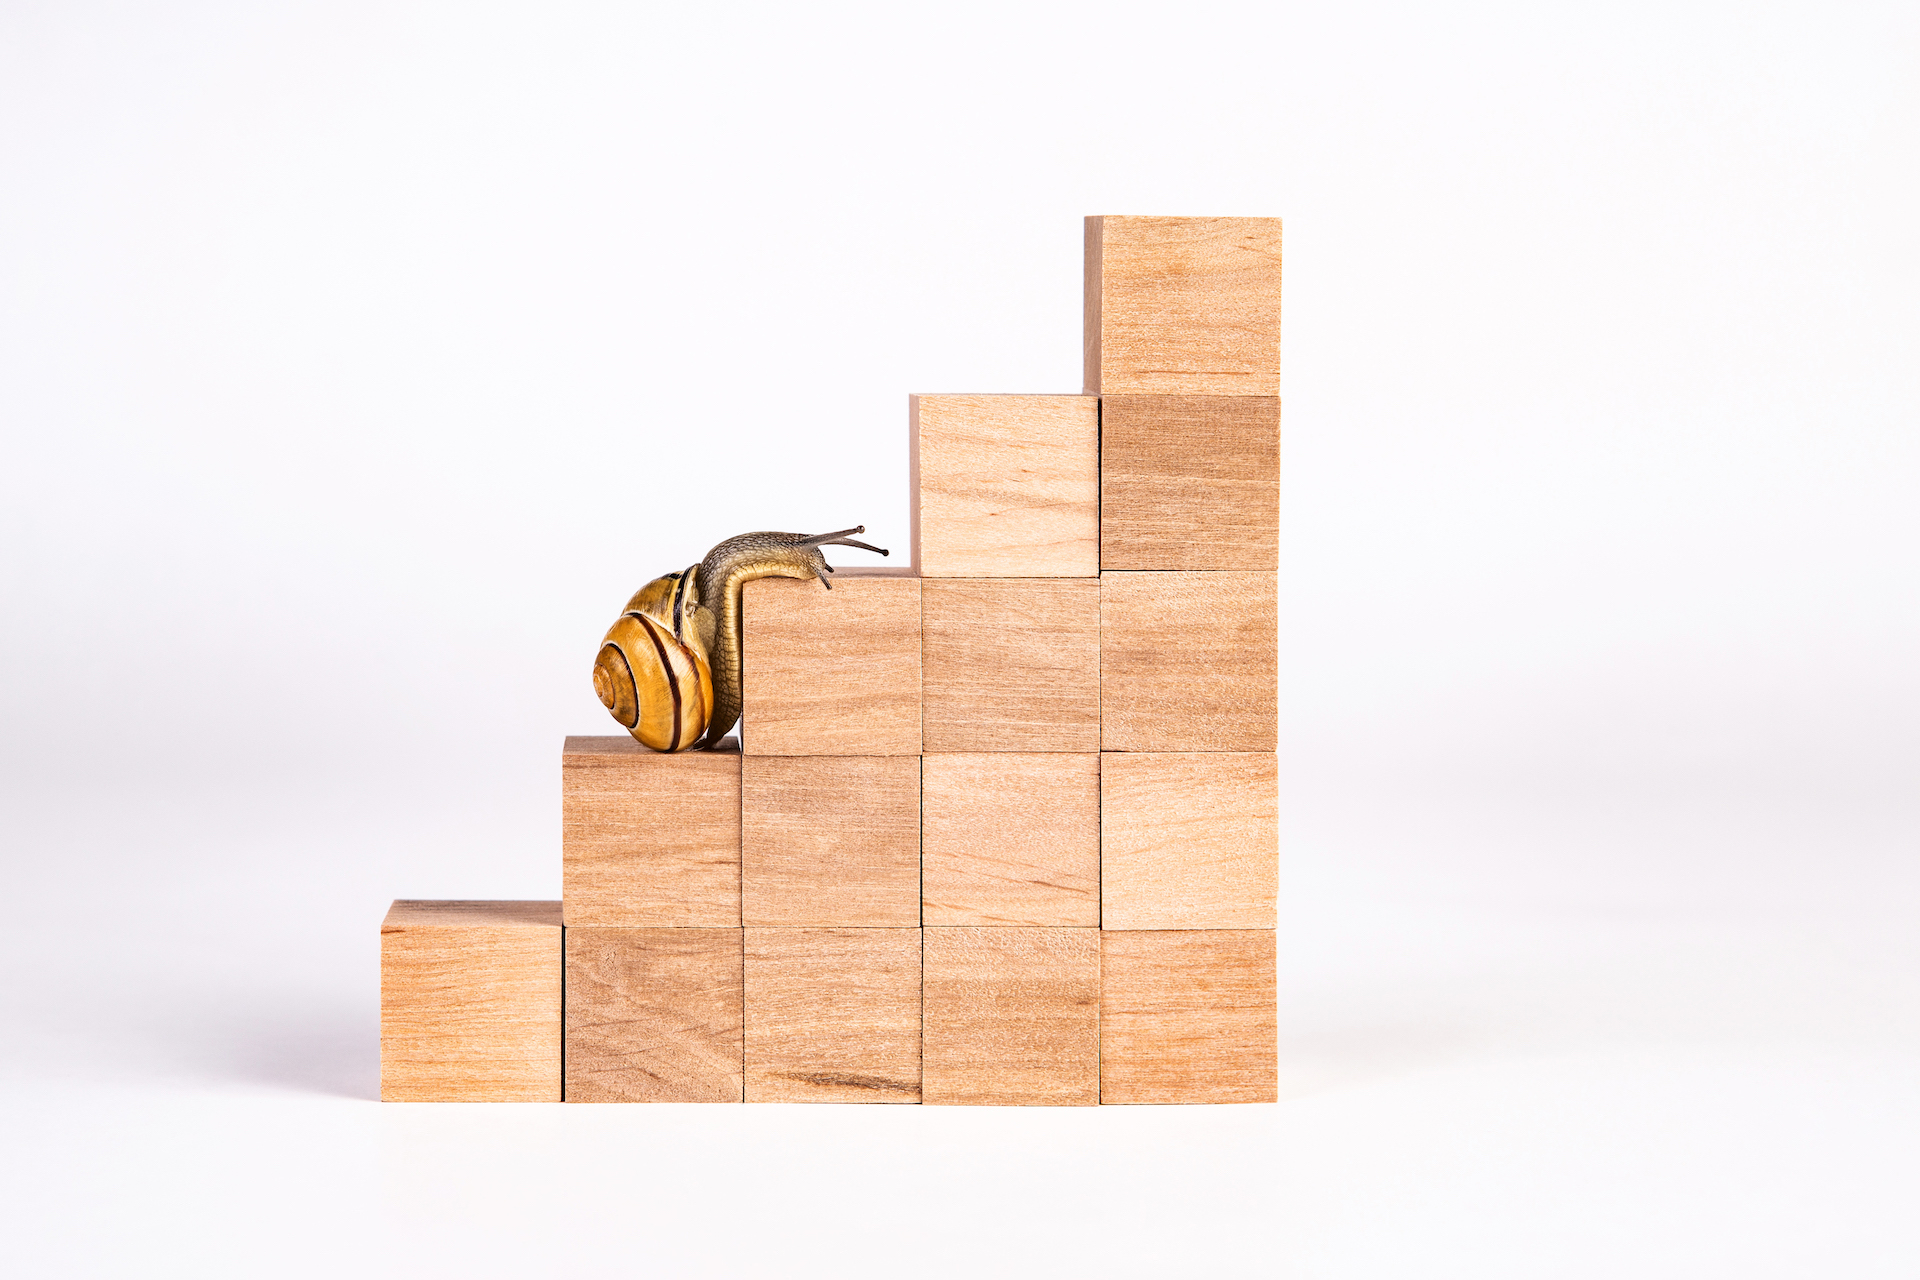 Snail walk up the career stairs. Ladder made with wooden cubes. Concept of personal development, career , changes, success.